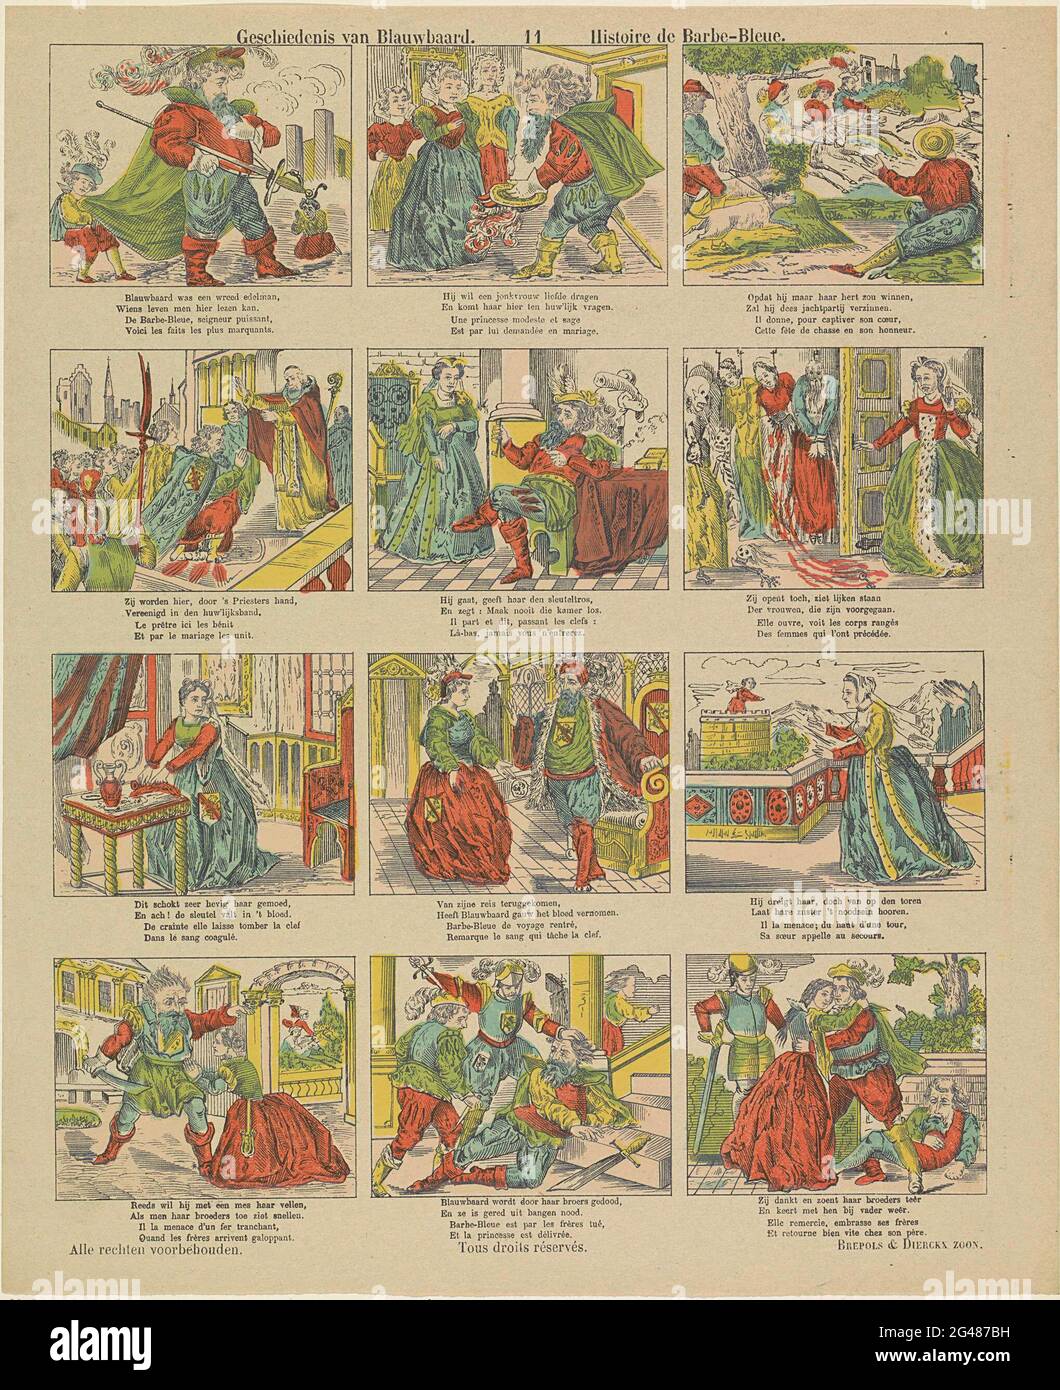 History of Bluebeard / Histoire de Barbe-Bleue. Leaf with 12 performances  from the fairy tale of blue beard. Under each image a two-legged fresh in  Dutch and in French. Numbered in the